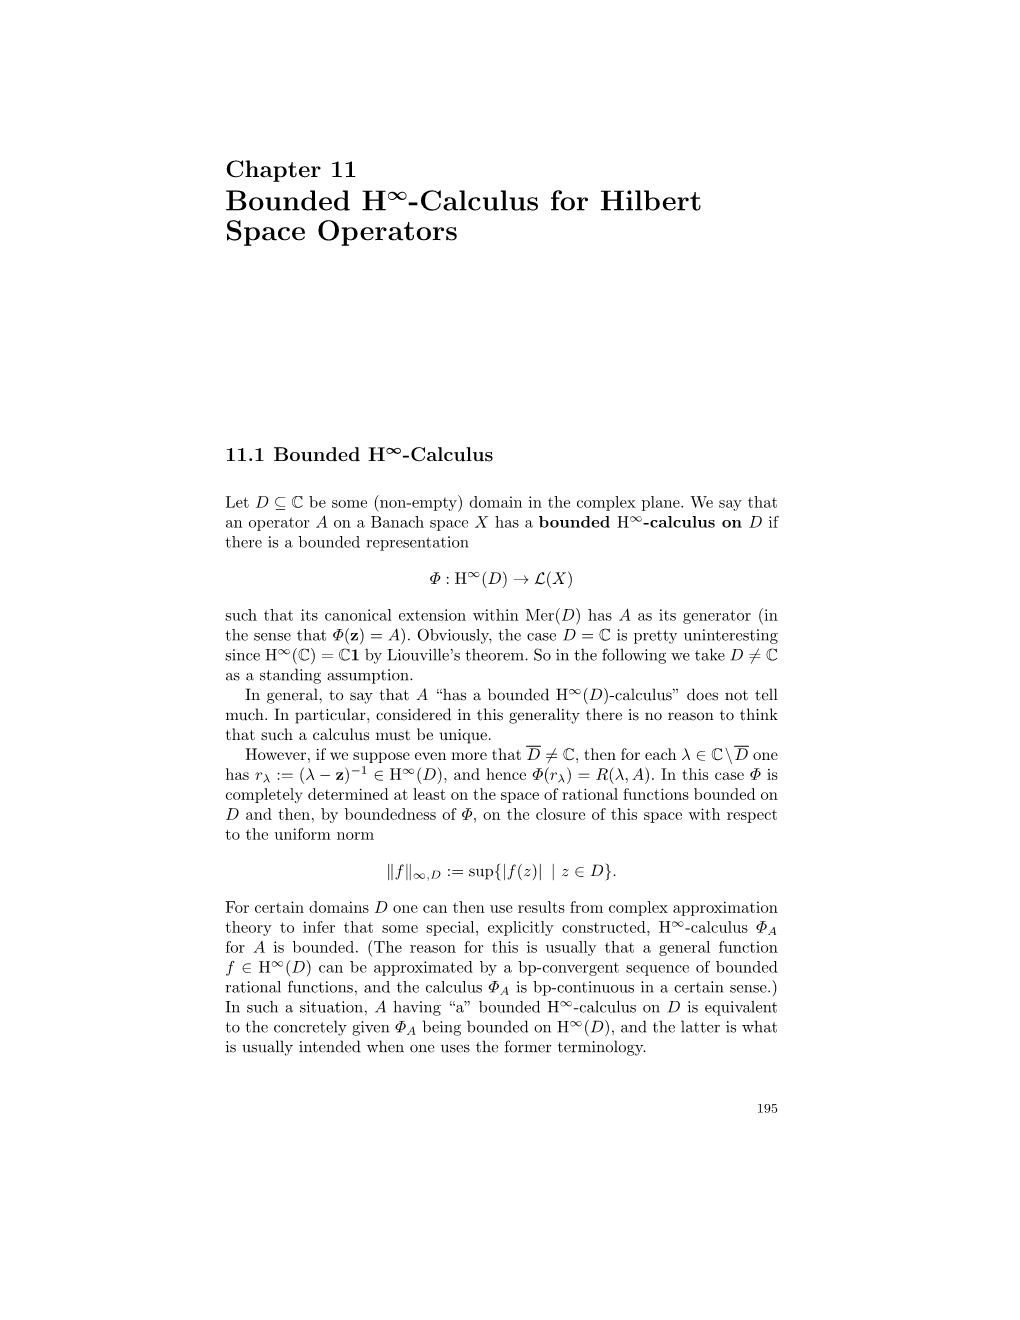 Bounded H∞-Calculus for Hilbert Space Operators